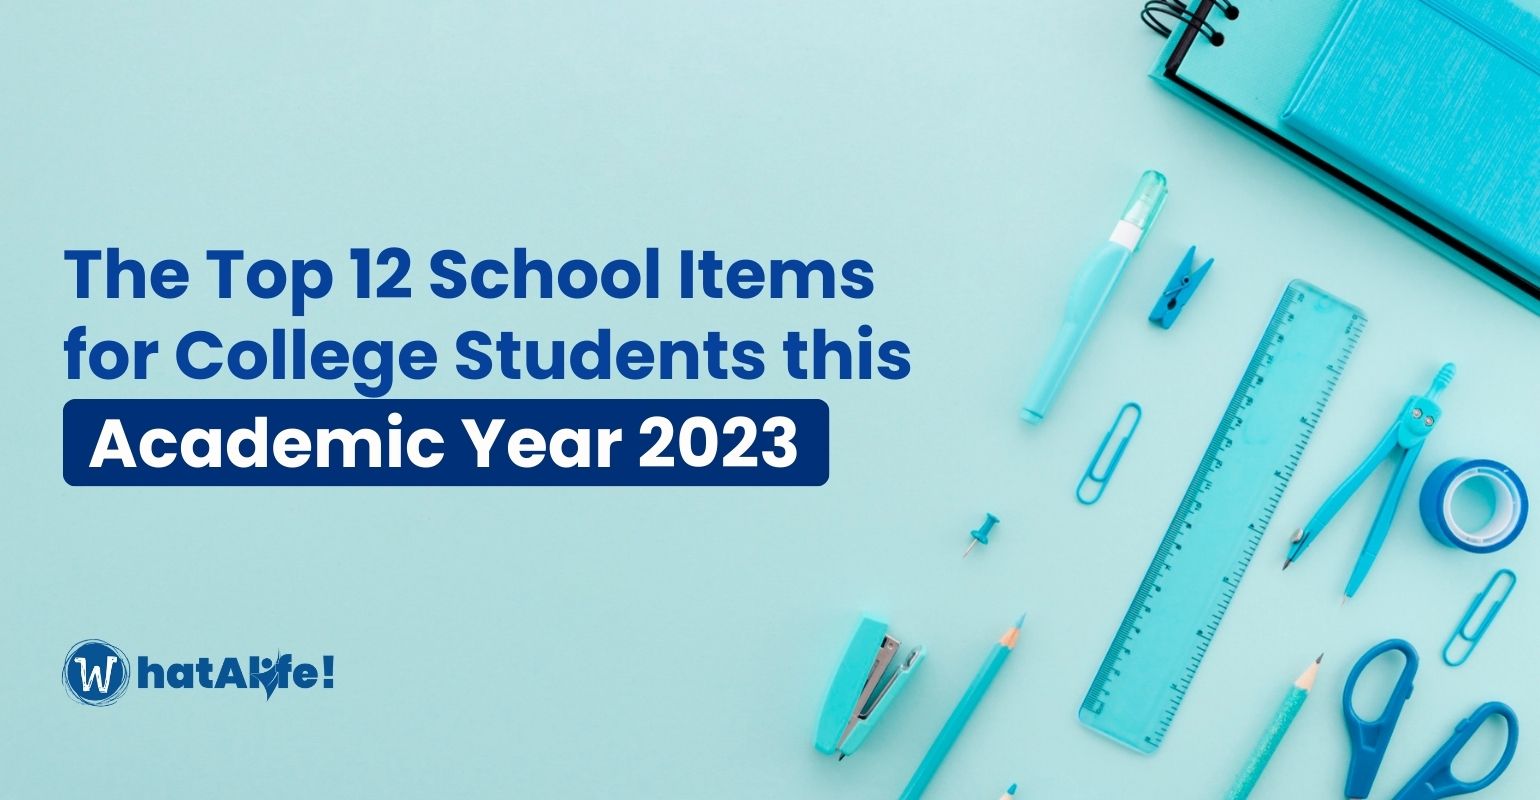 The Top 12 School Items for College Students this Academic Year 2023